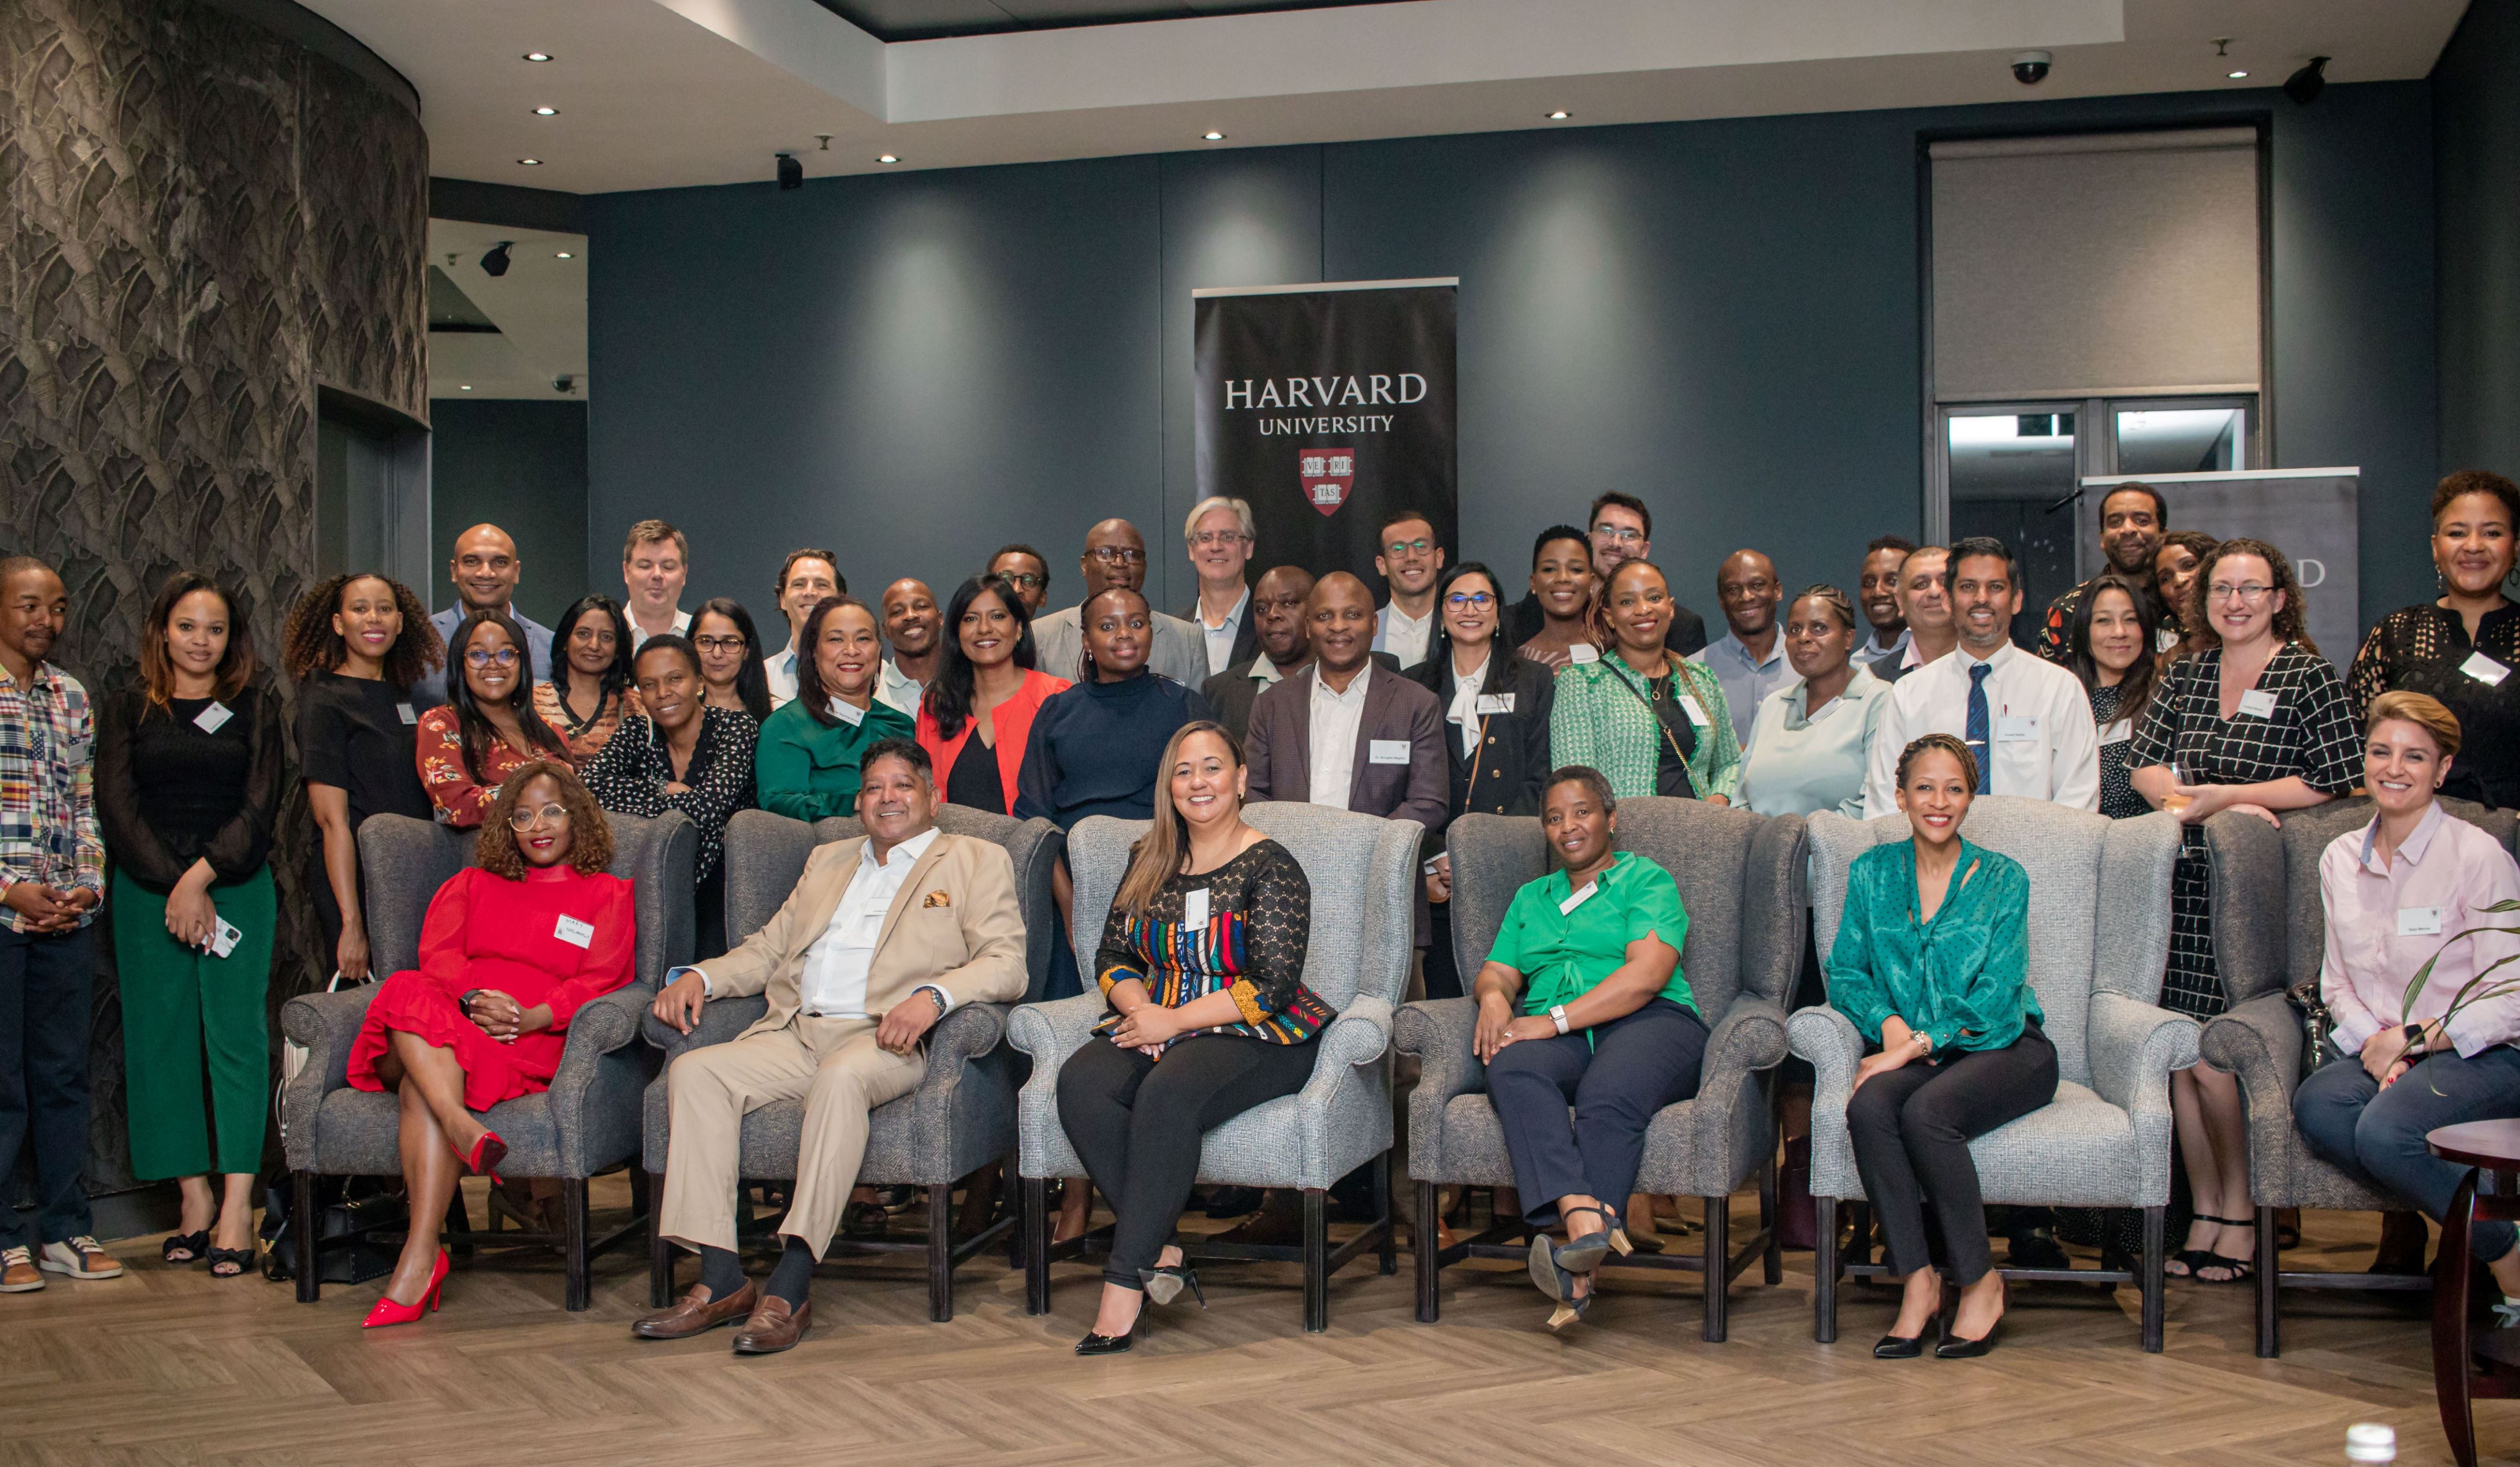 Members of the Harvard Alumni Association of South Africa stand together for a group photo.